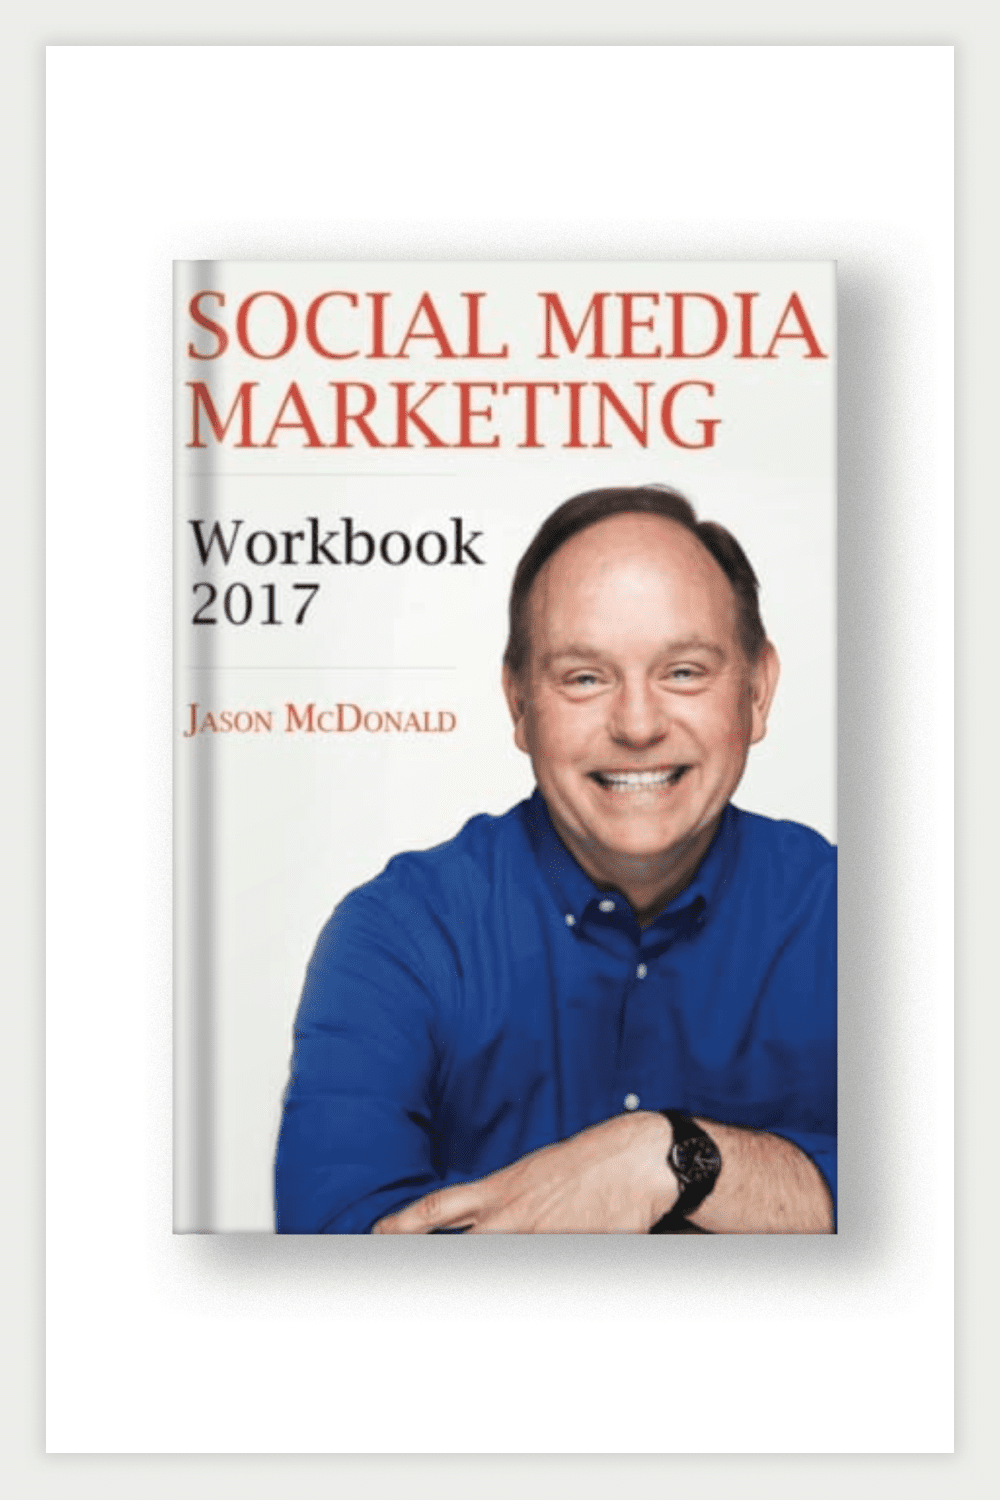 Cover of the Social Media Marketing Workbook.